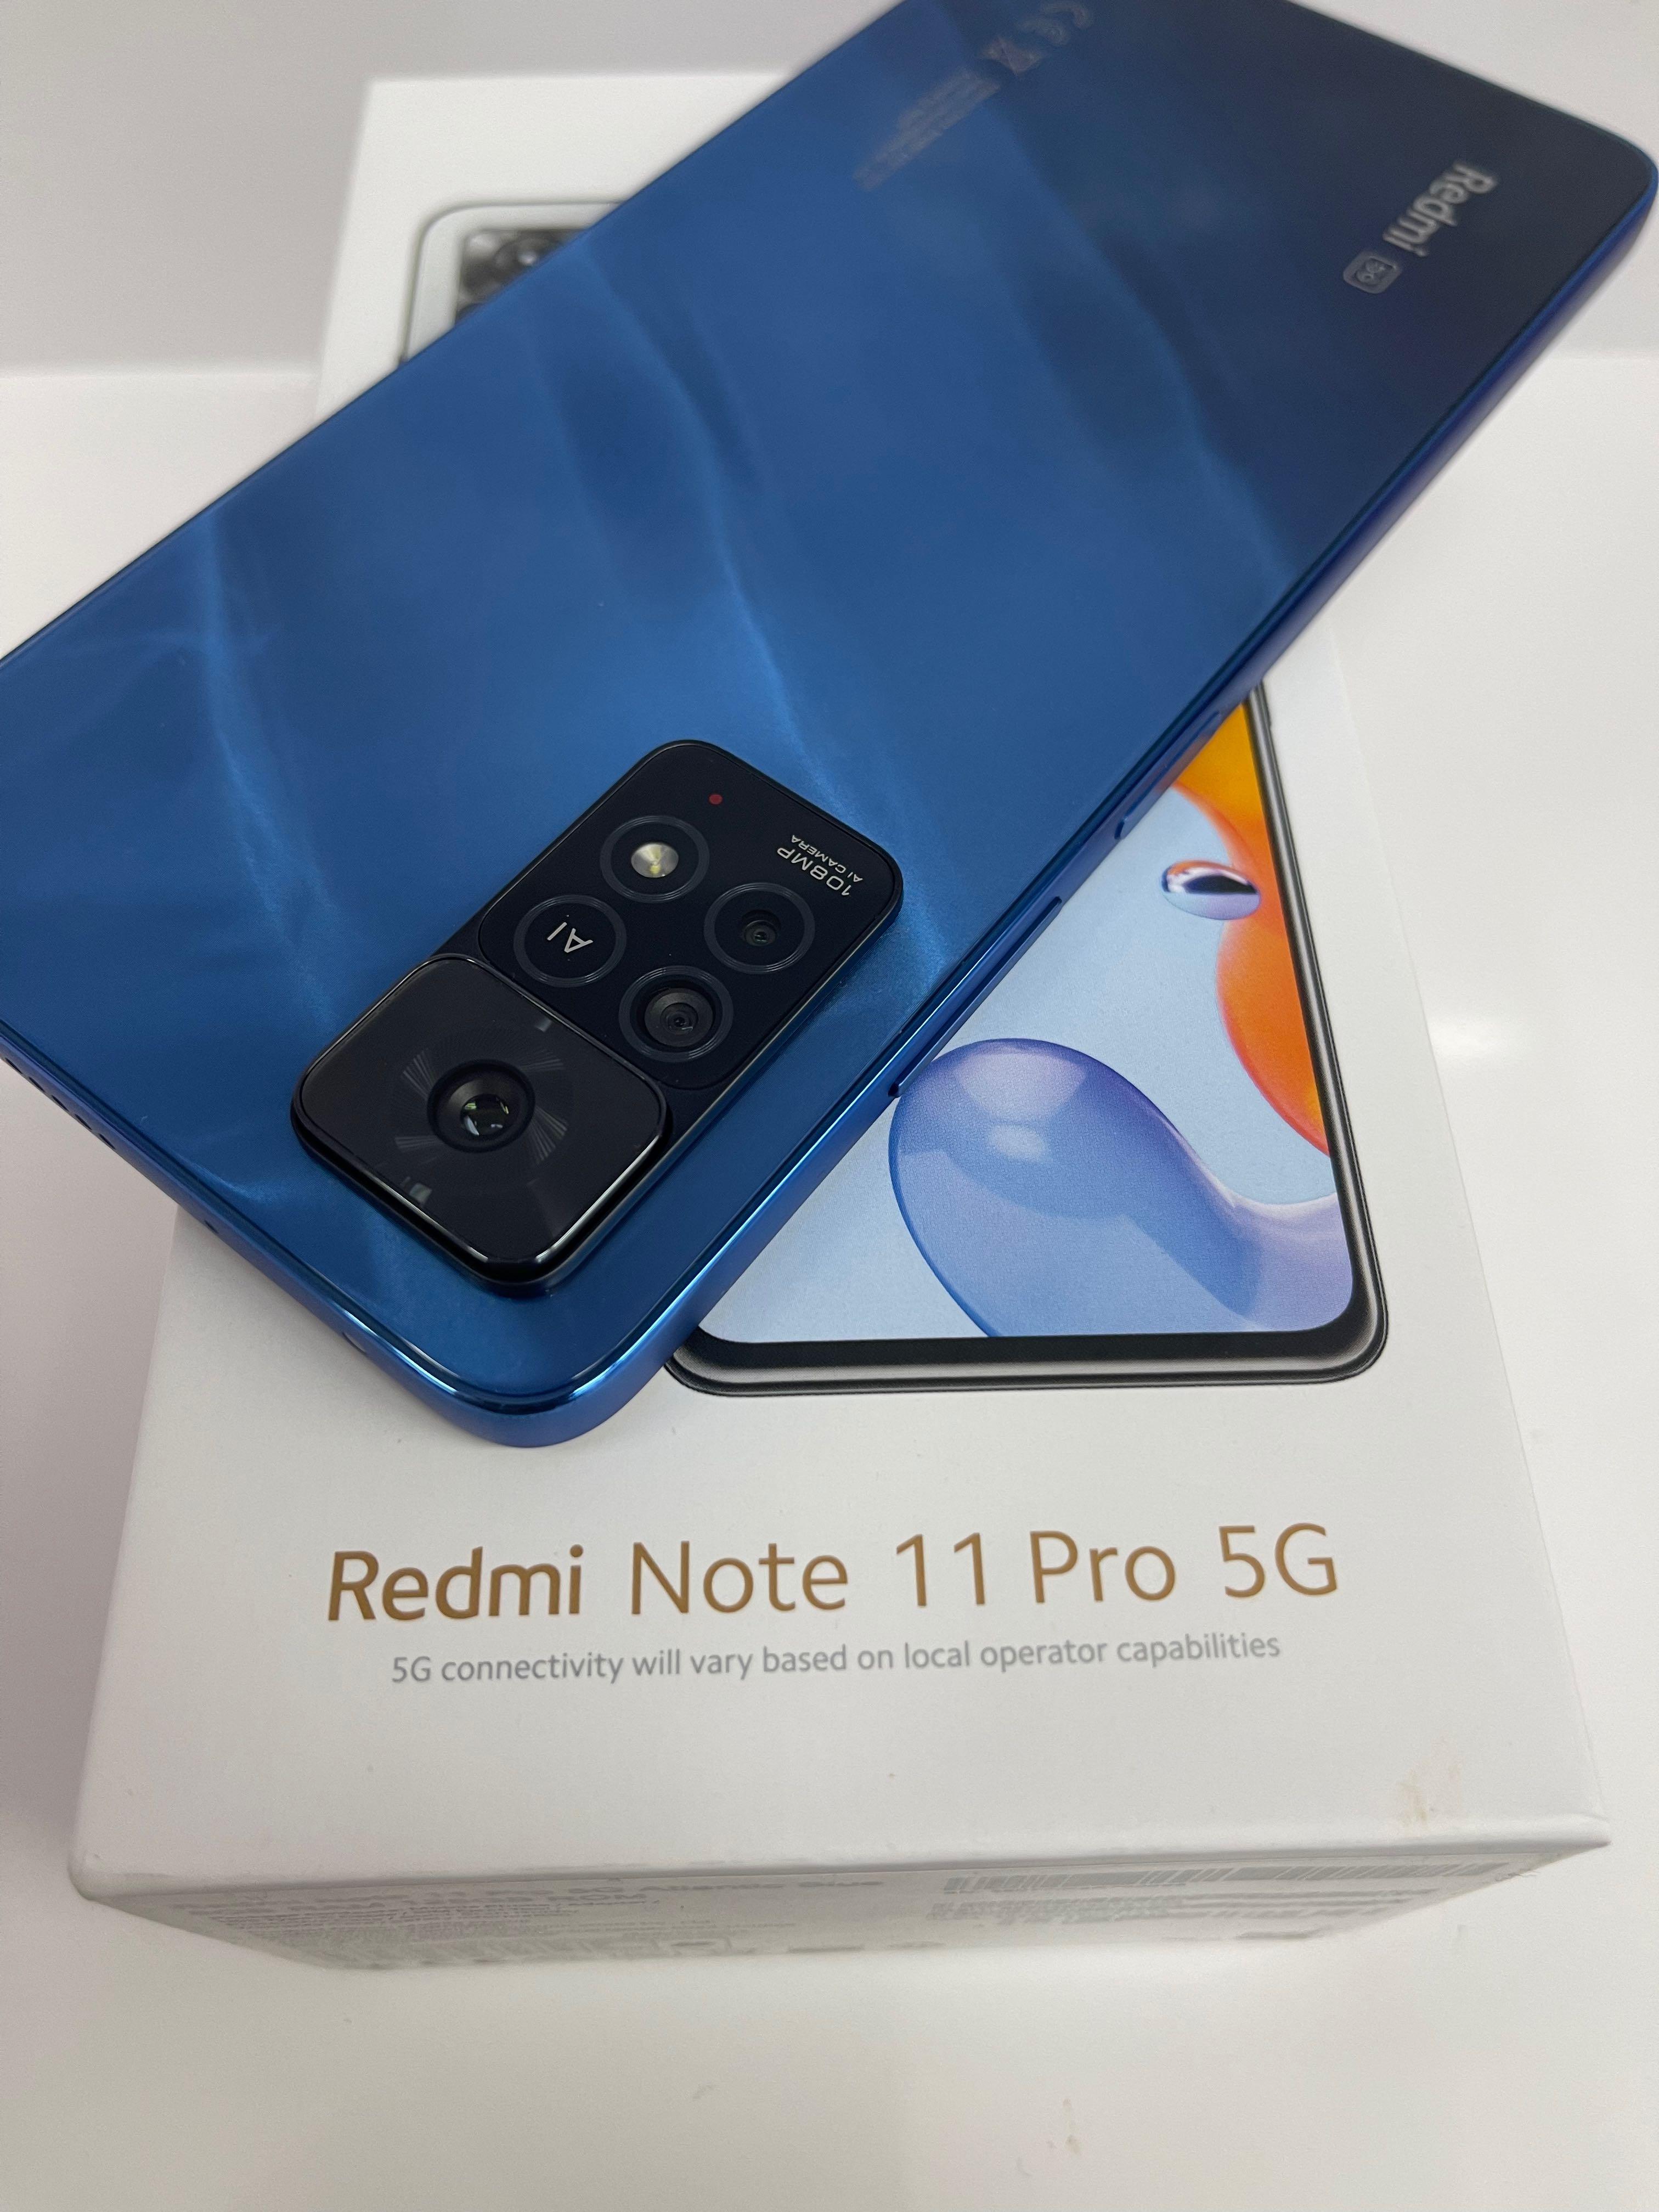 Redmi Note 11 Pro 5G, 8GB RAM + 256GB ROM, Atlantic Blue in Color, Like New  Condition, 10/10, Xiaomi Warranty 1 Year and 6Months